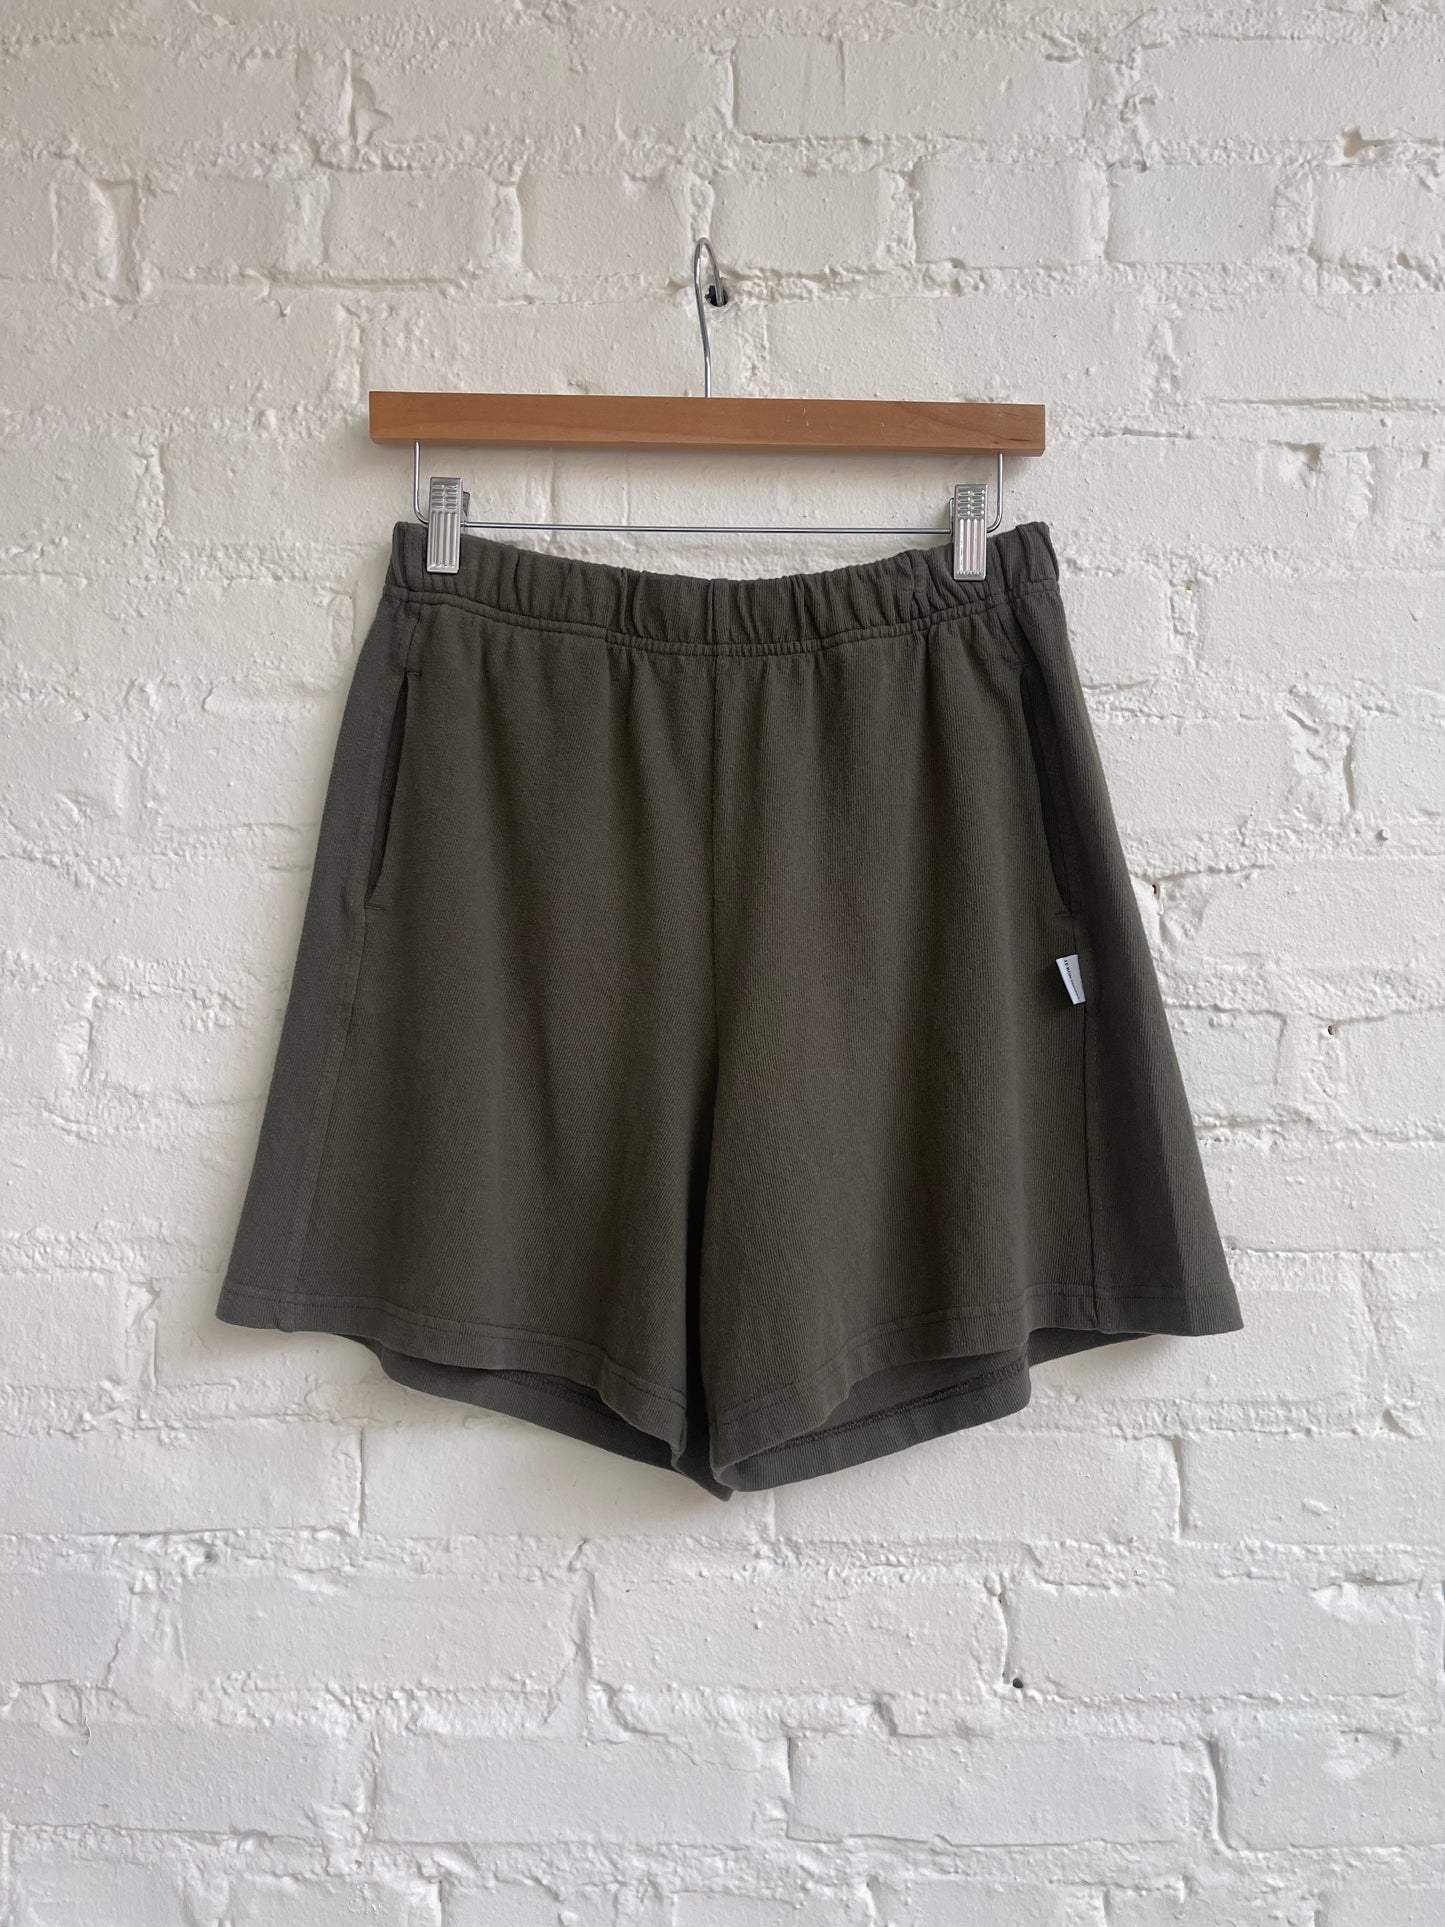 Le Bon Shoppe Flared Basketball Shorts in OLIVE GREEN - ( select size )